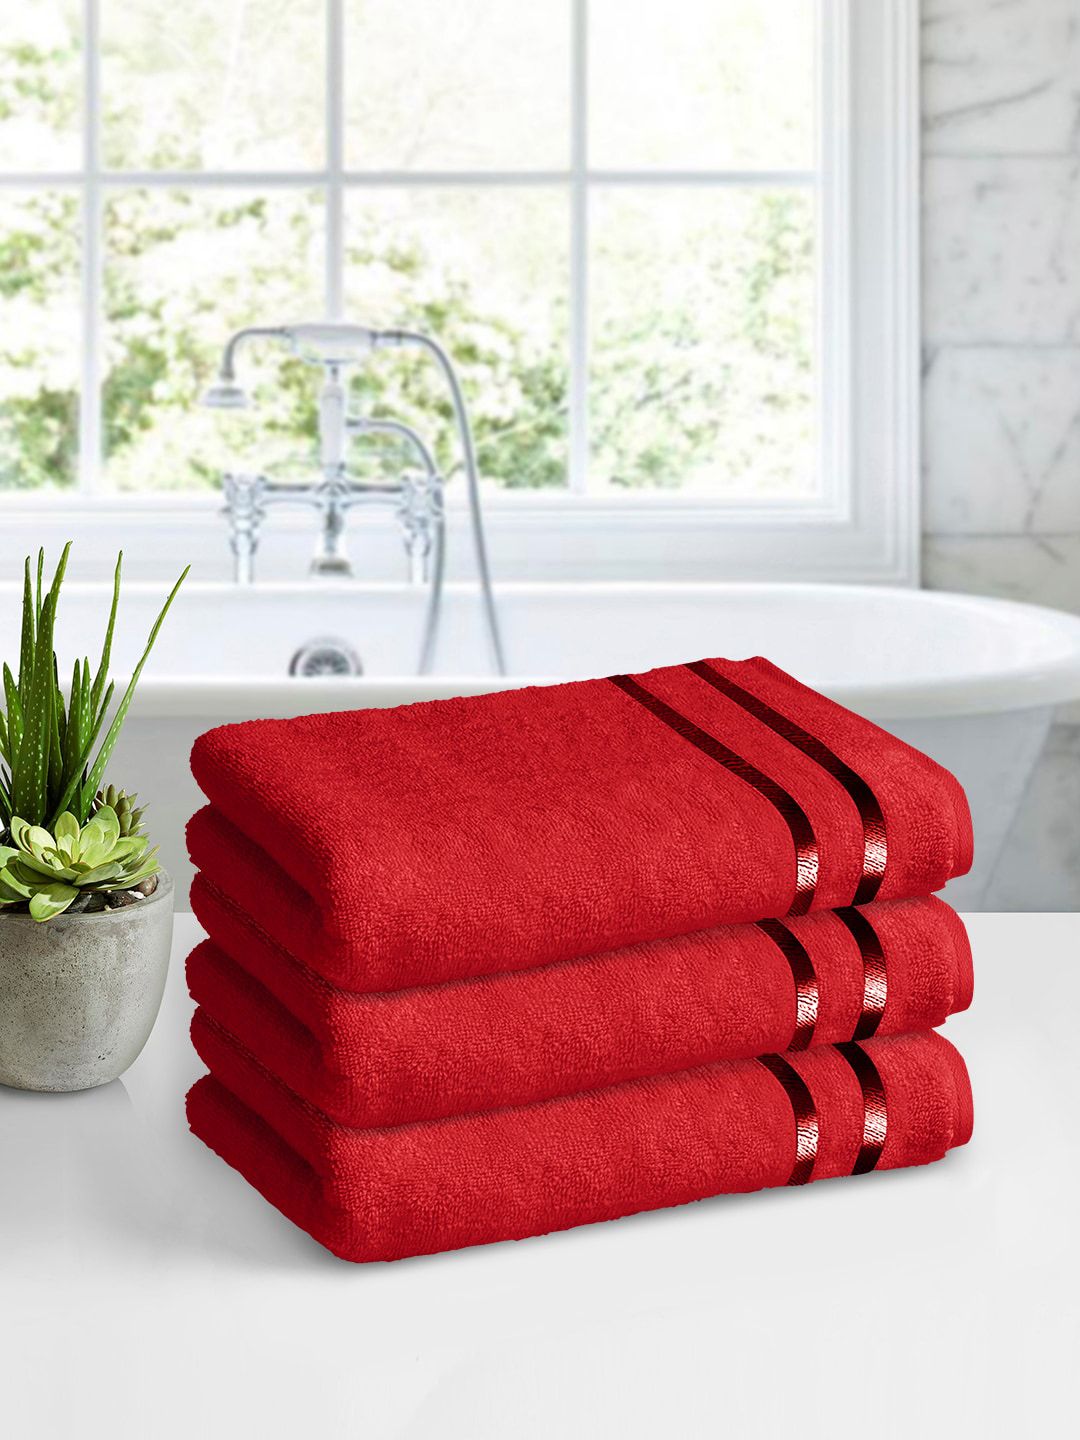 Story@home Set Of 3 Red Solid Cotton 450GSM Medium Size Bath Towels Price in India